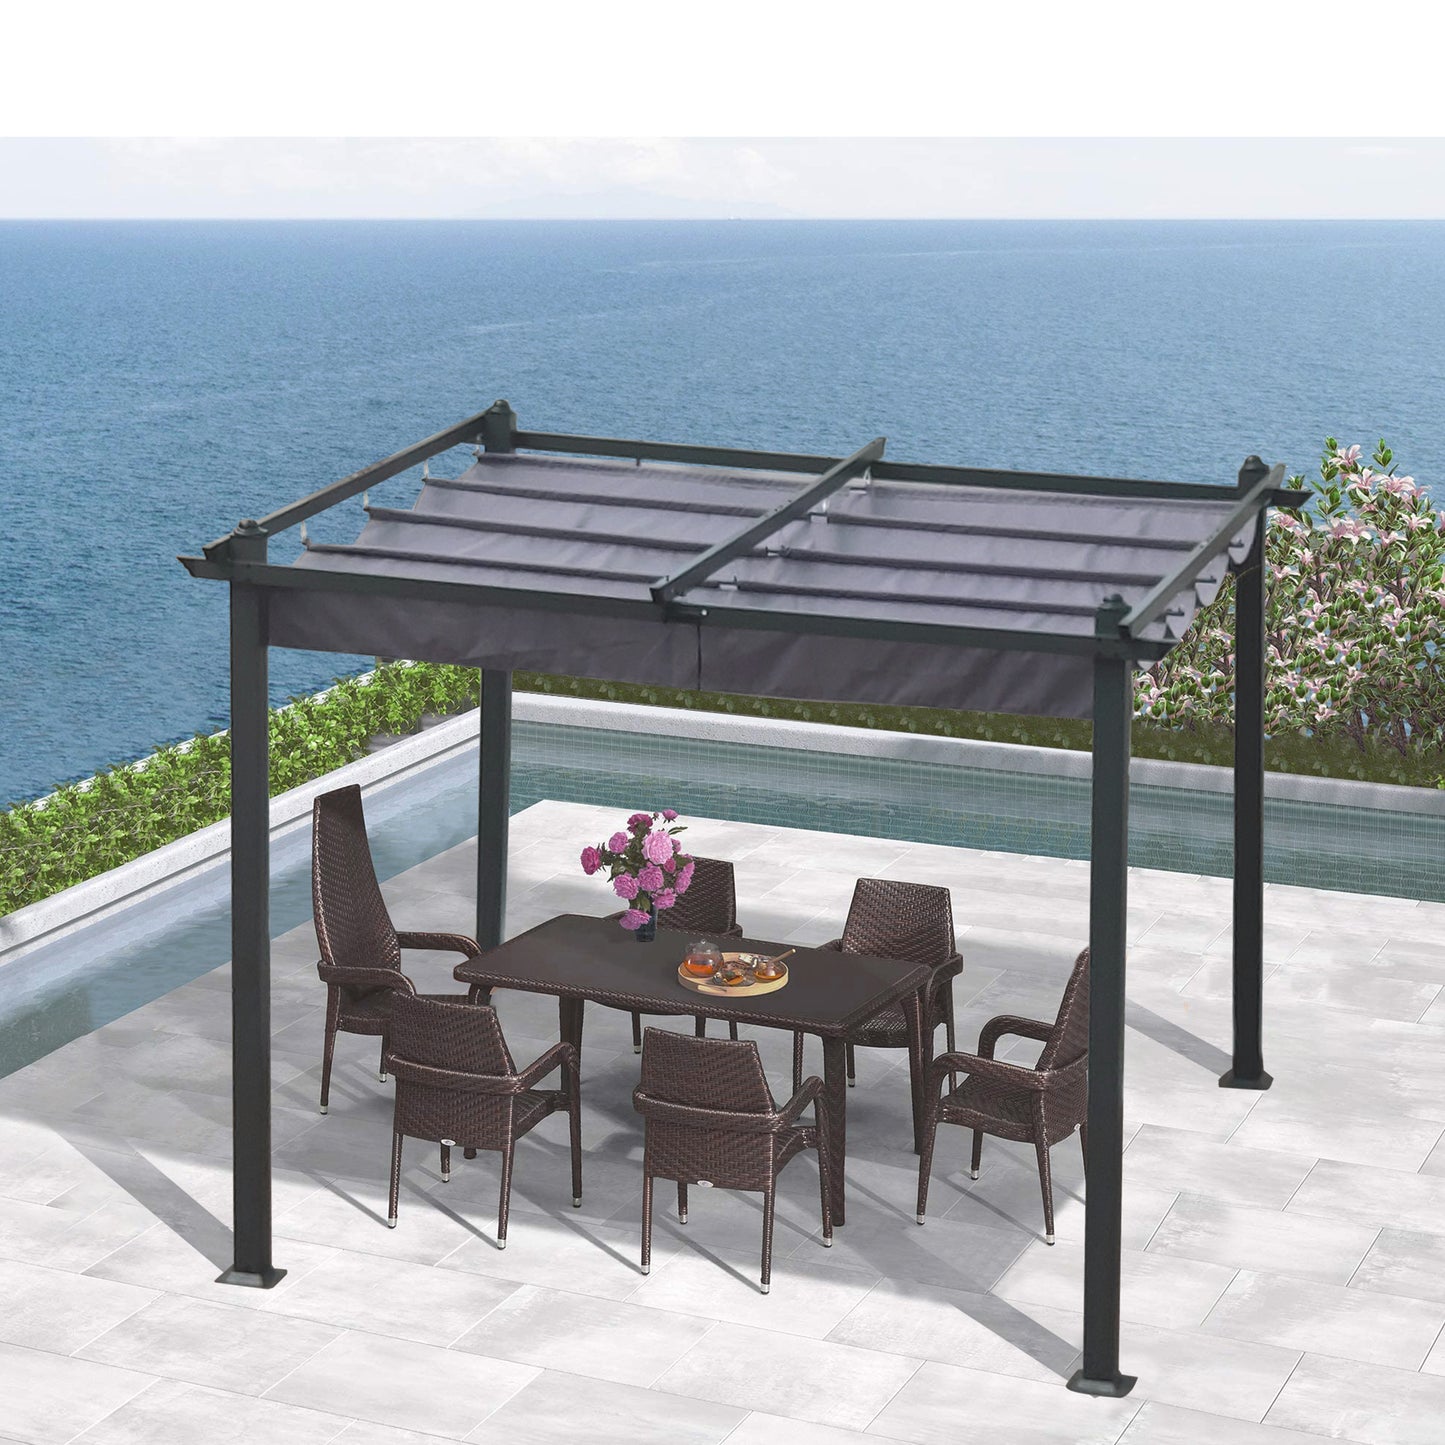 10x10 Ft Outdoor Pergola With Retractable Canopy